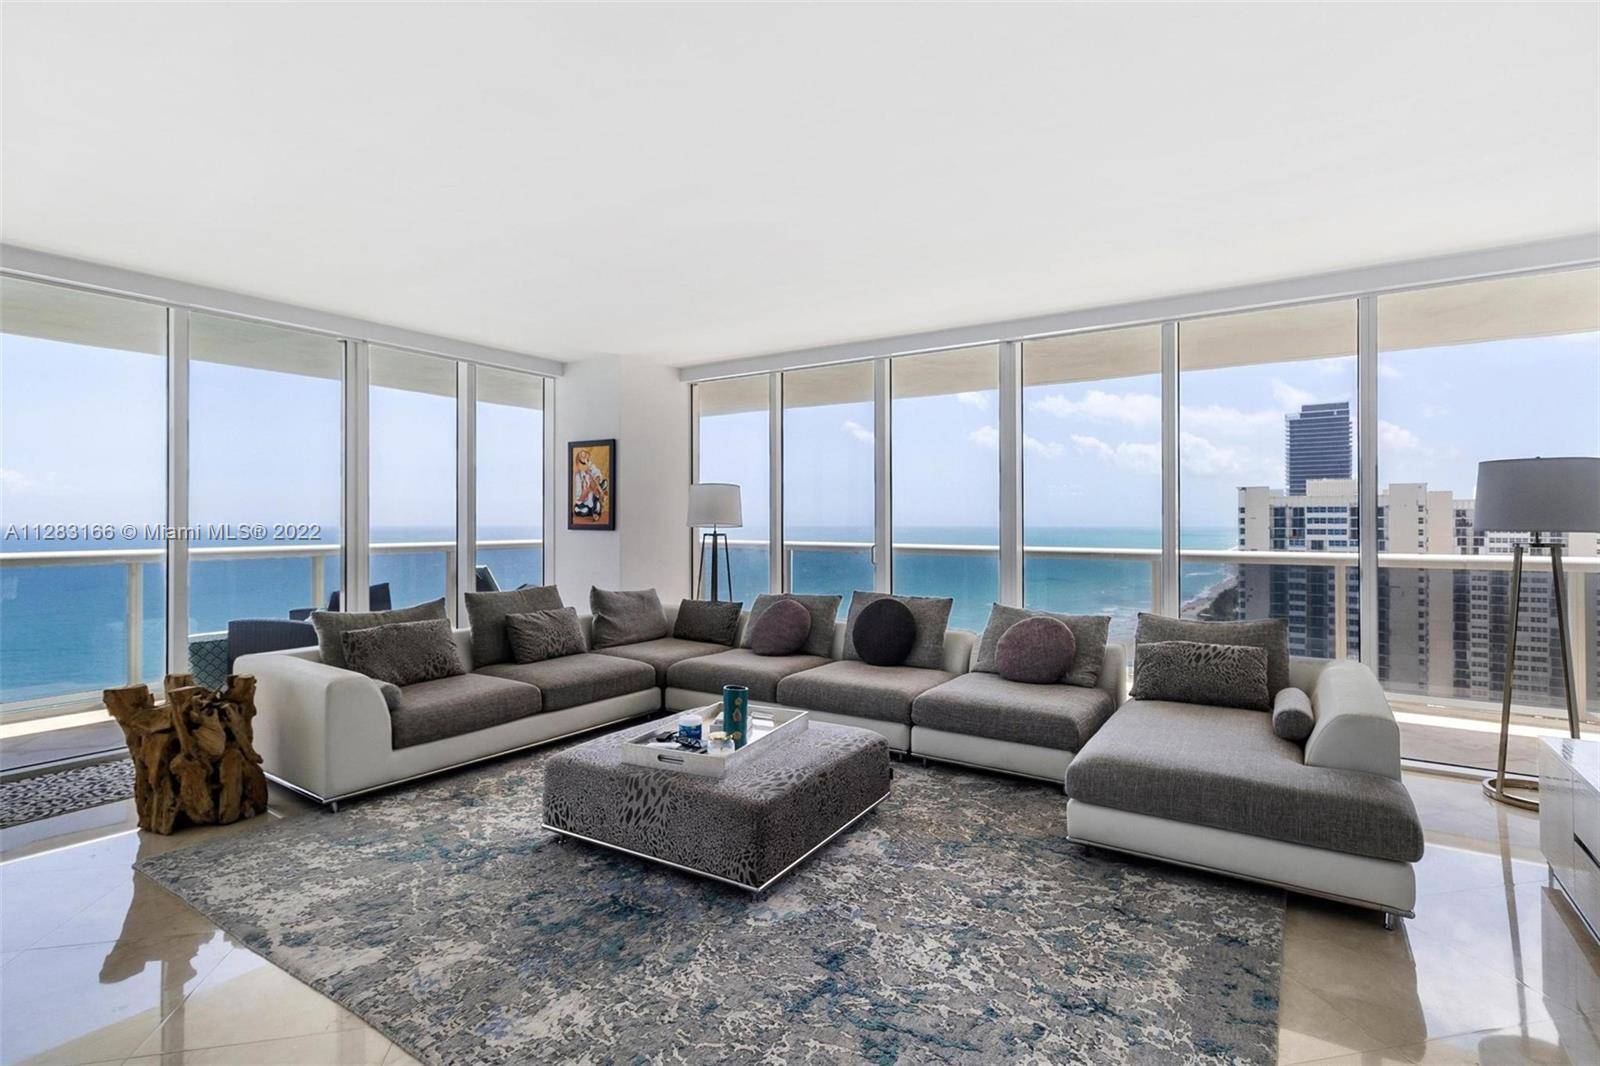 Beautiful Corner Unit South East direct ocean view, 3 bed 3 bath, Model B, marble floor throughout, completely furnished, Jacuzzi in master suite.